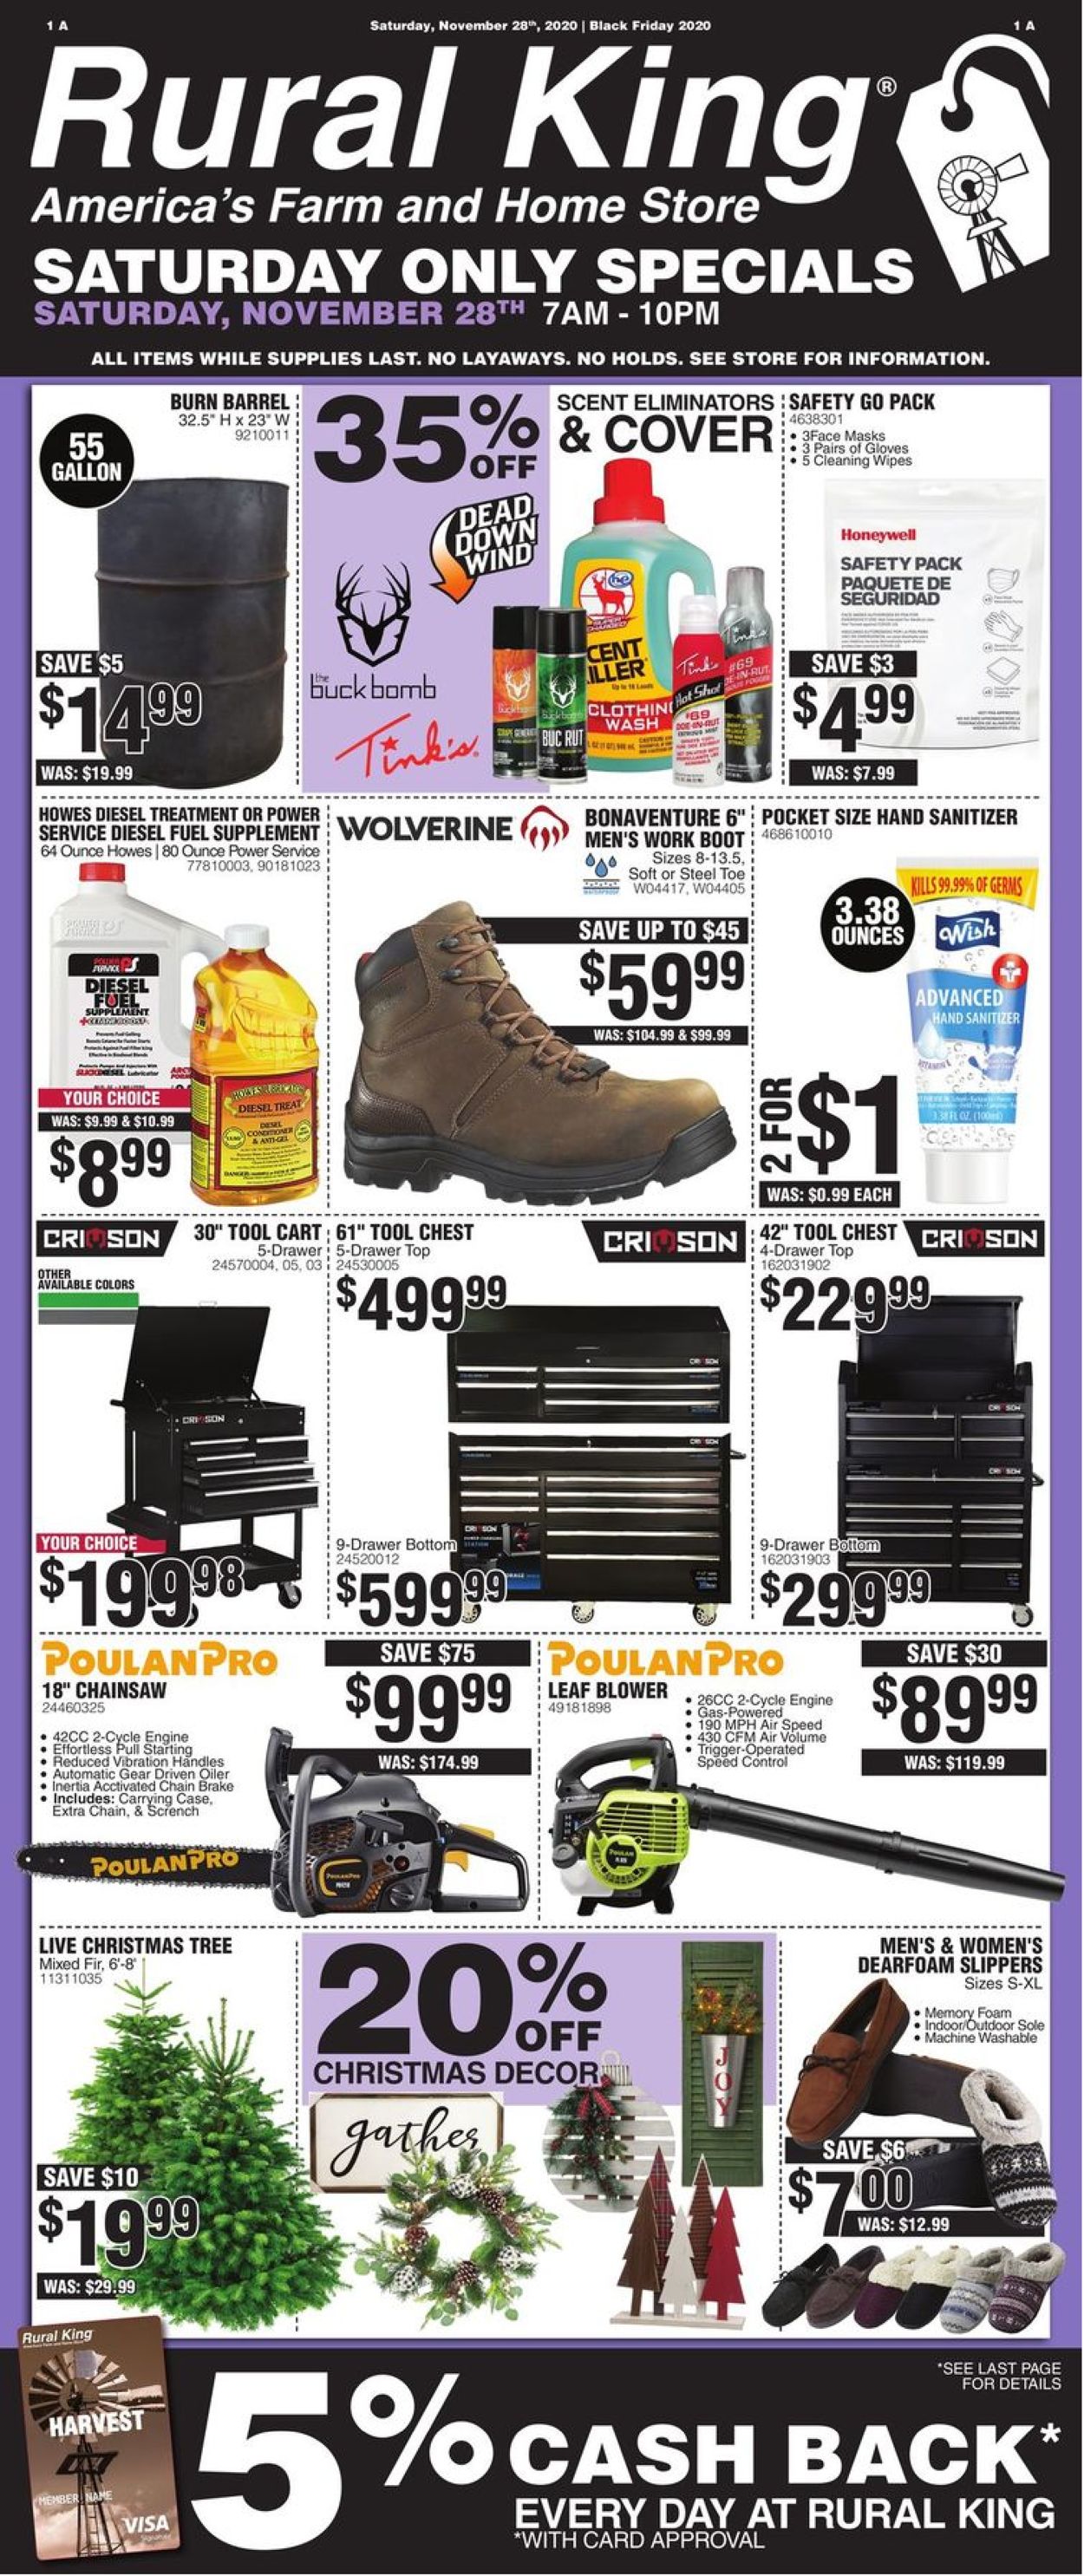 Rural King Black Friday 2020 Current weekly ad 11/28 11/28/2020